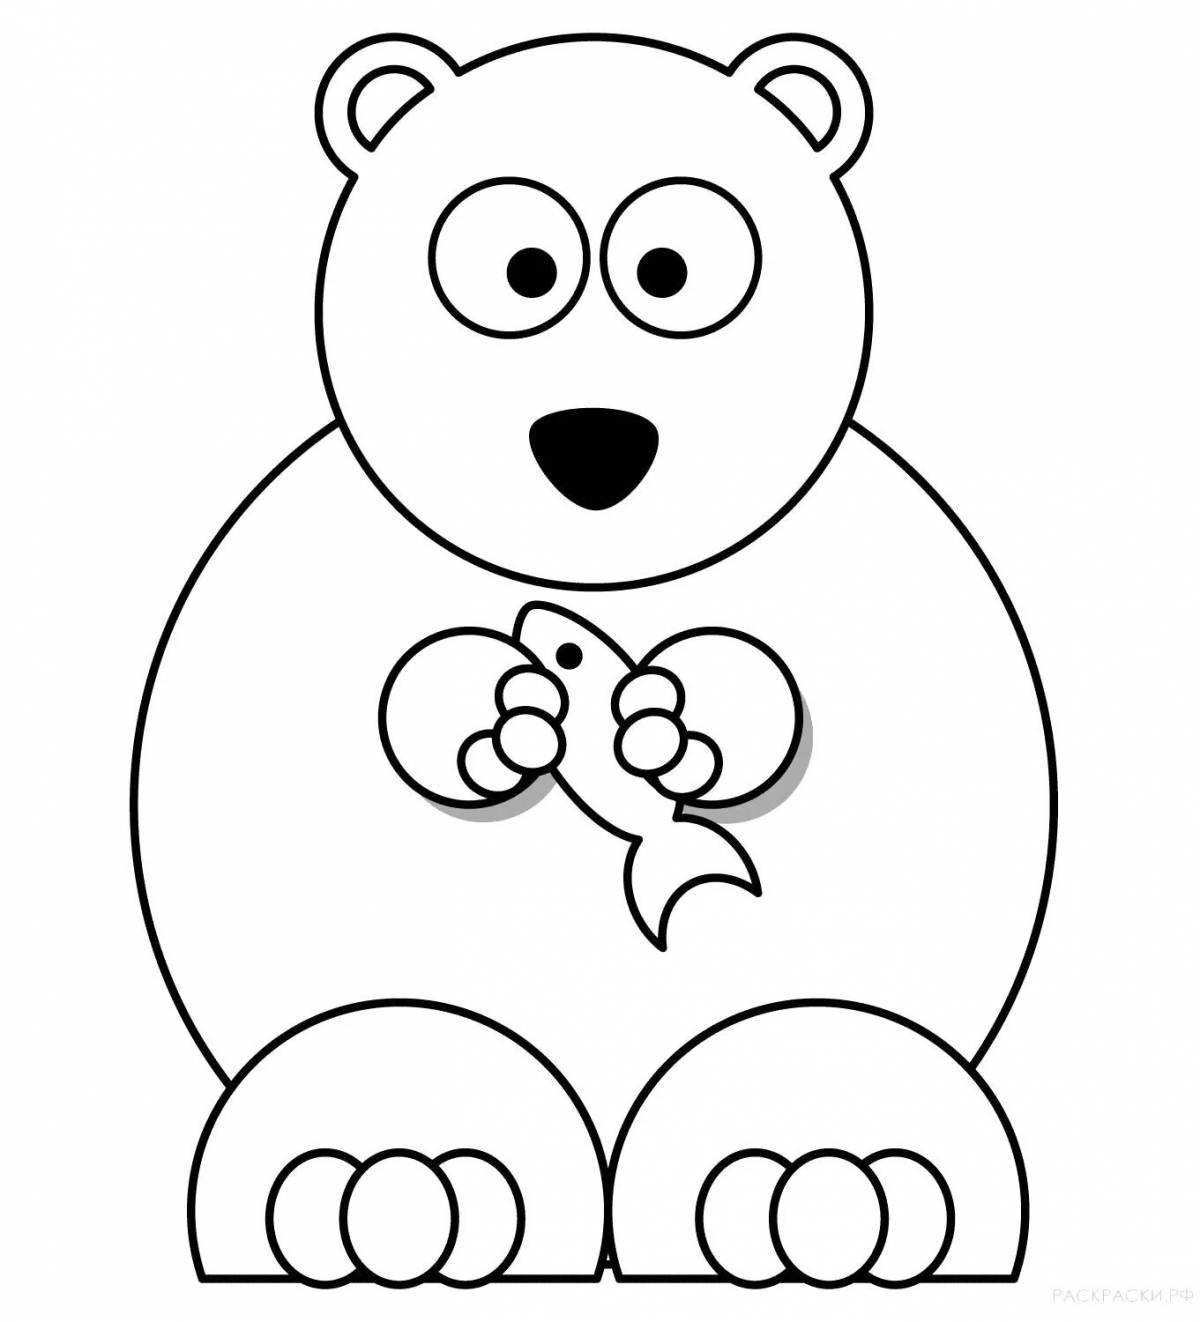 Playful gummy bears coloring page